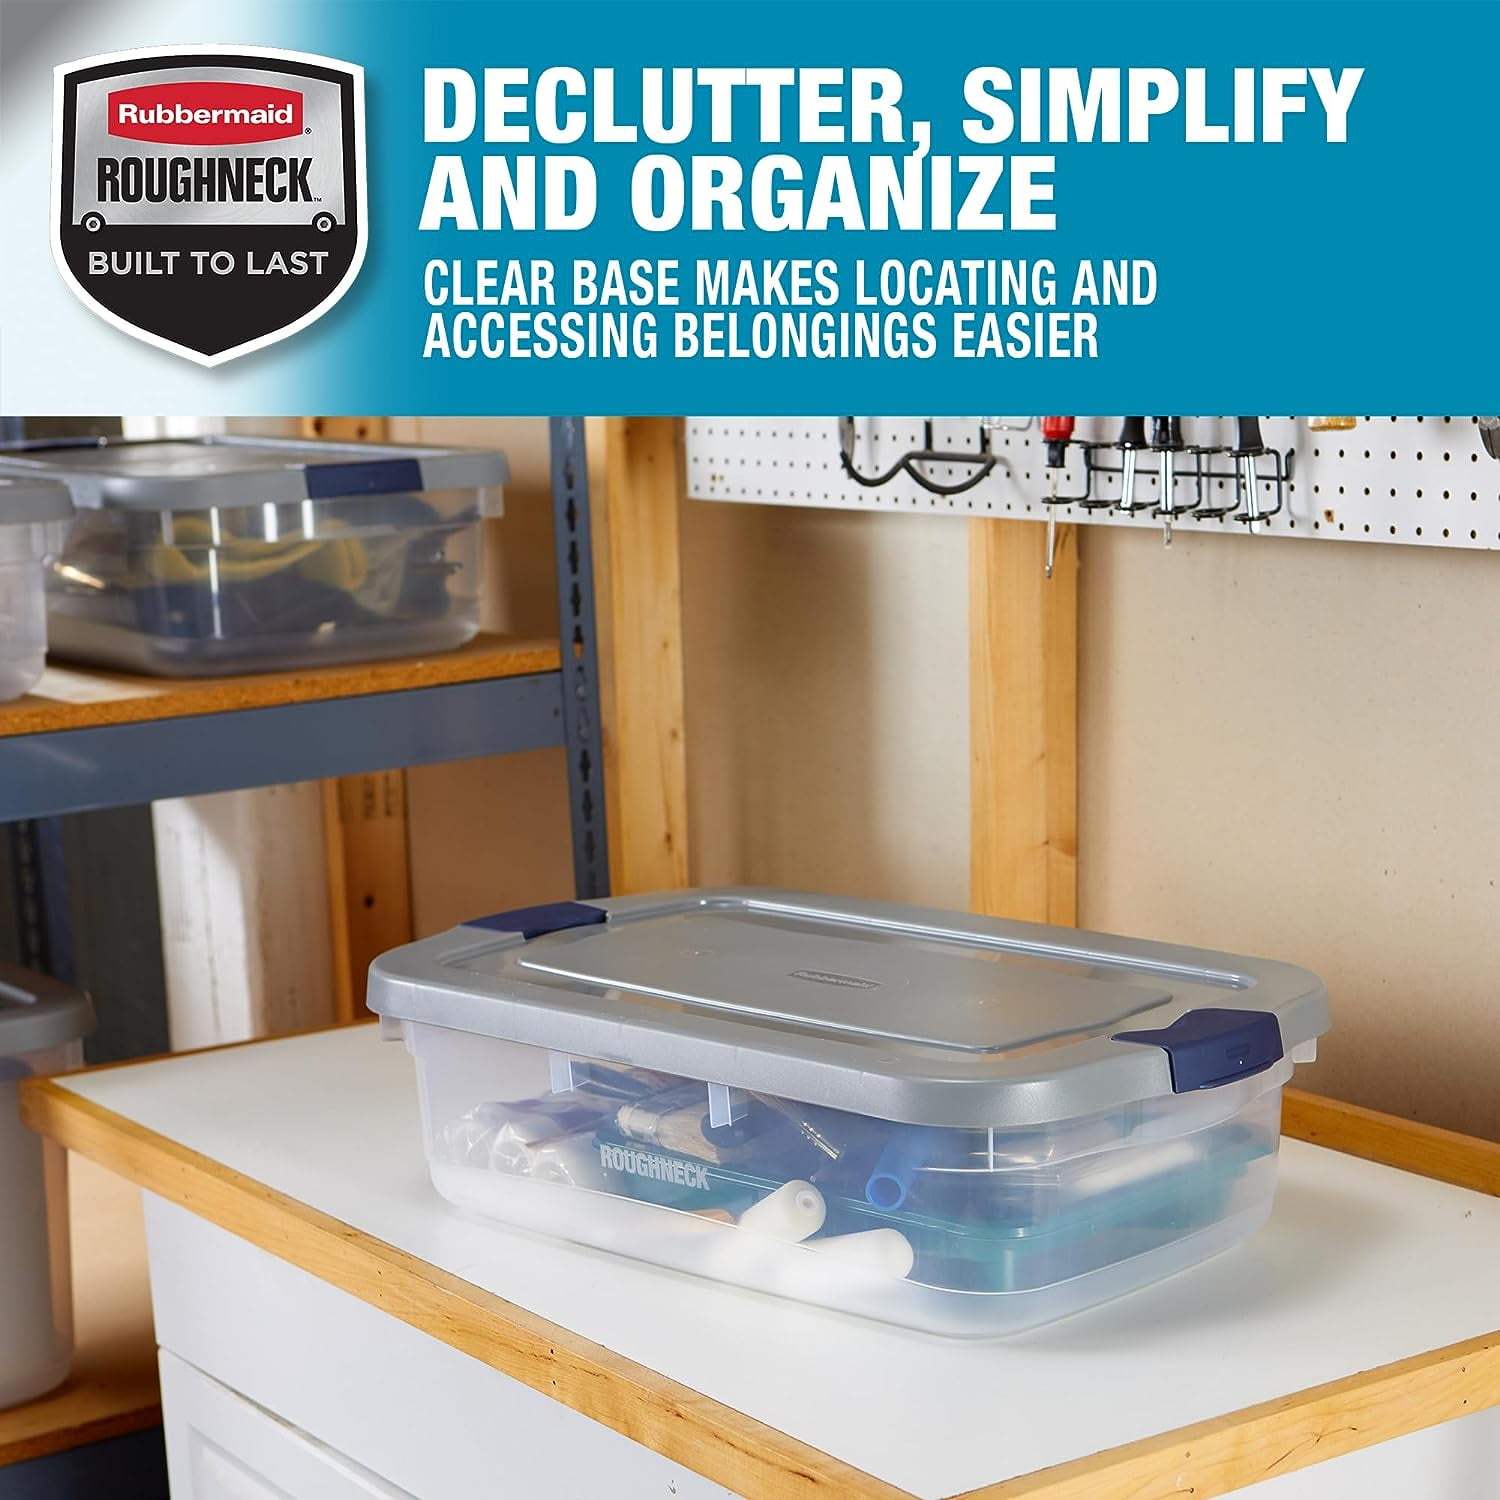 Rubbermaid 95 Qt. Cleversore Clear Tote - Bliffert Lumber and Hardware